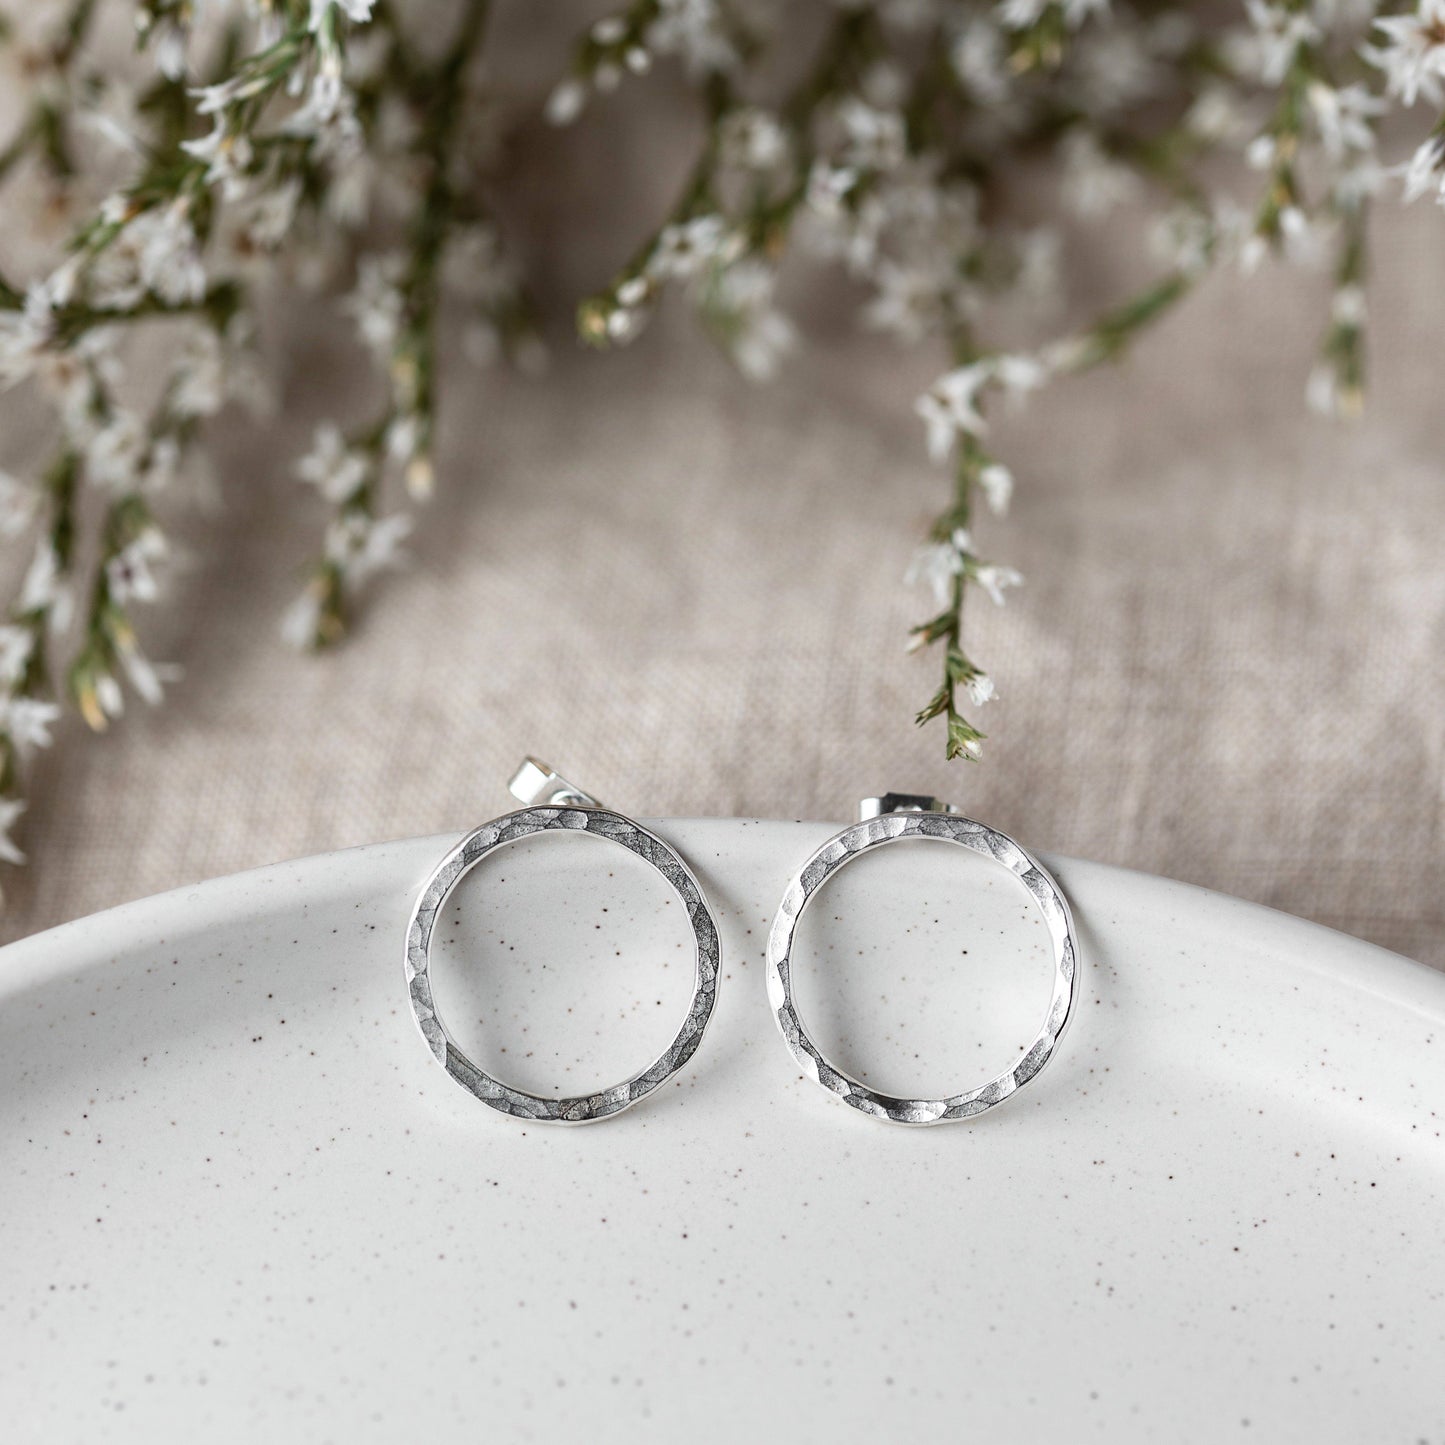 Large Hammered Circle Silver Studs Earrings Hanmade by Anna Calvert Jewellery in the UK